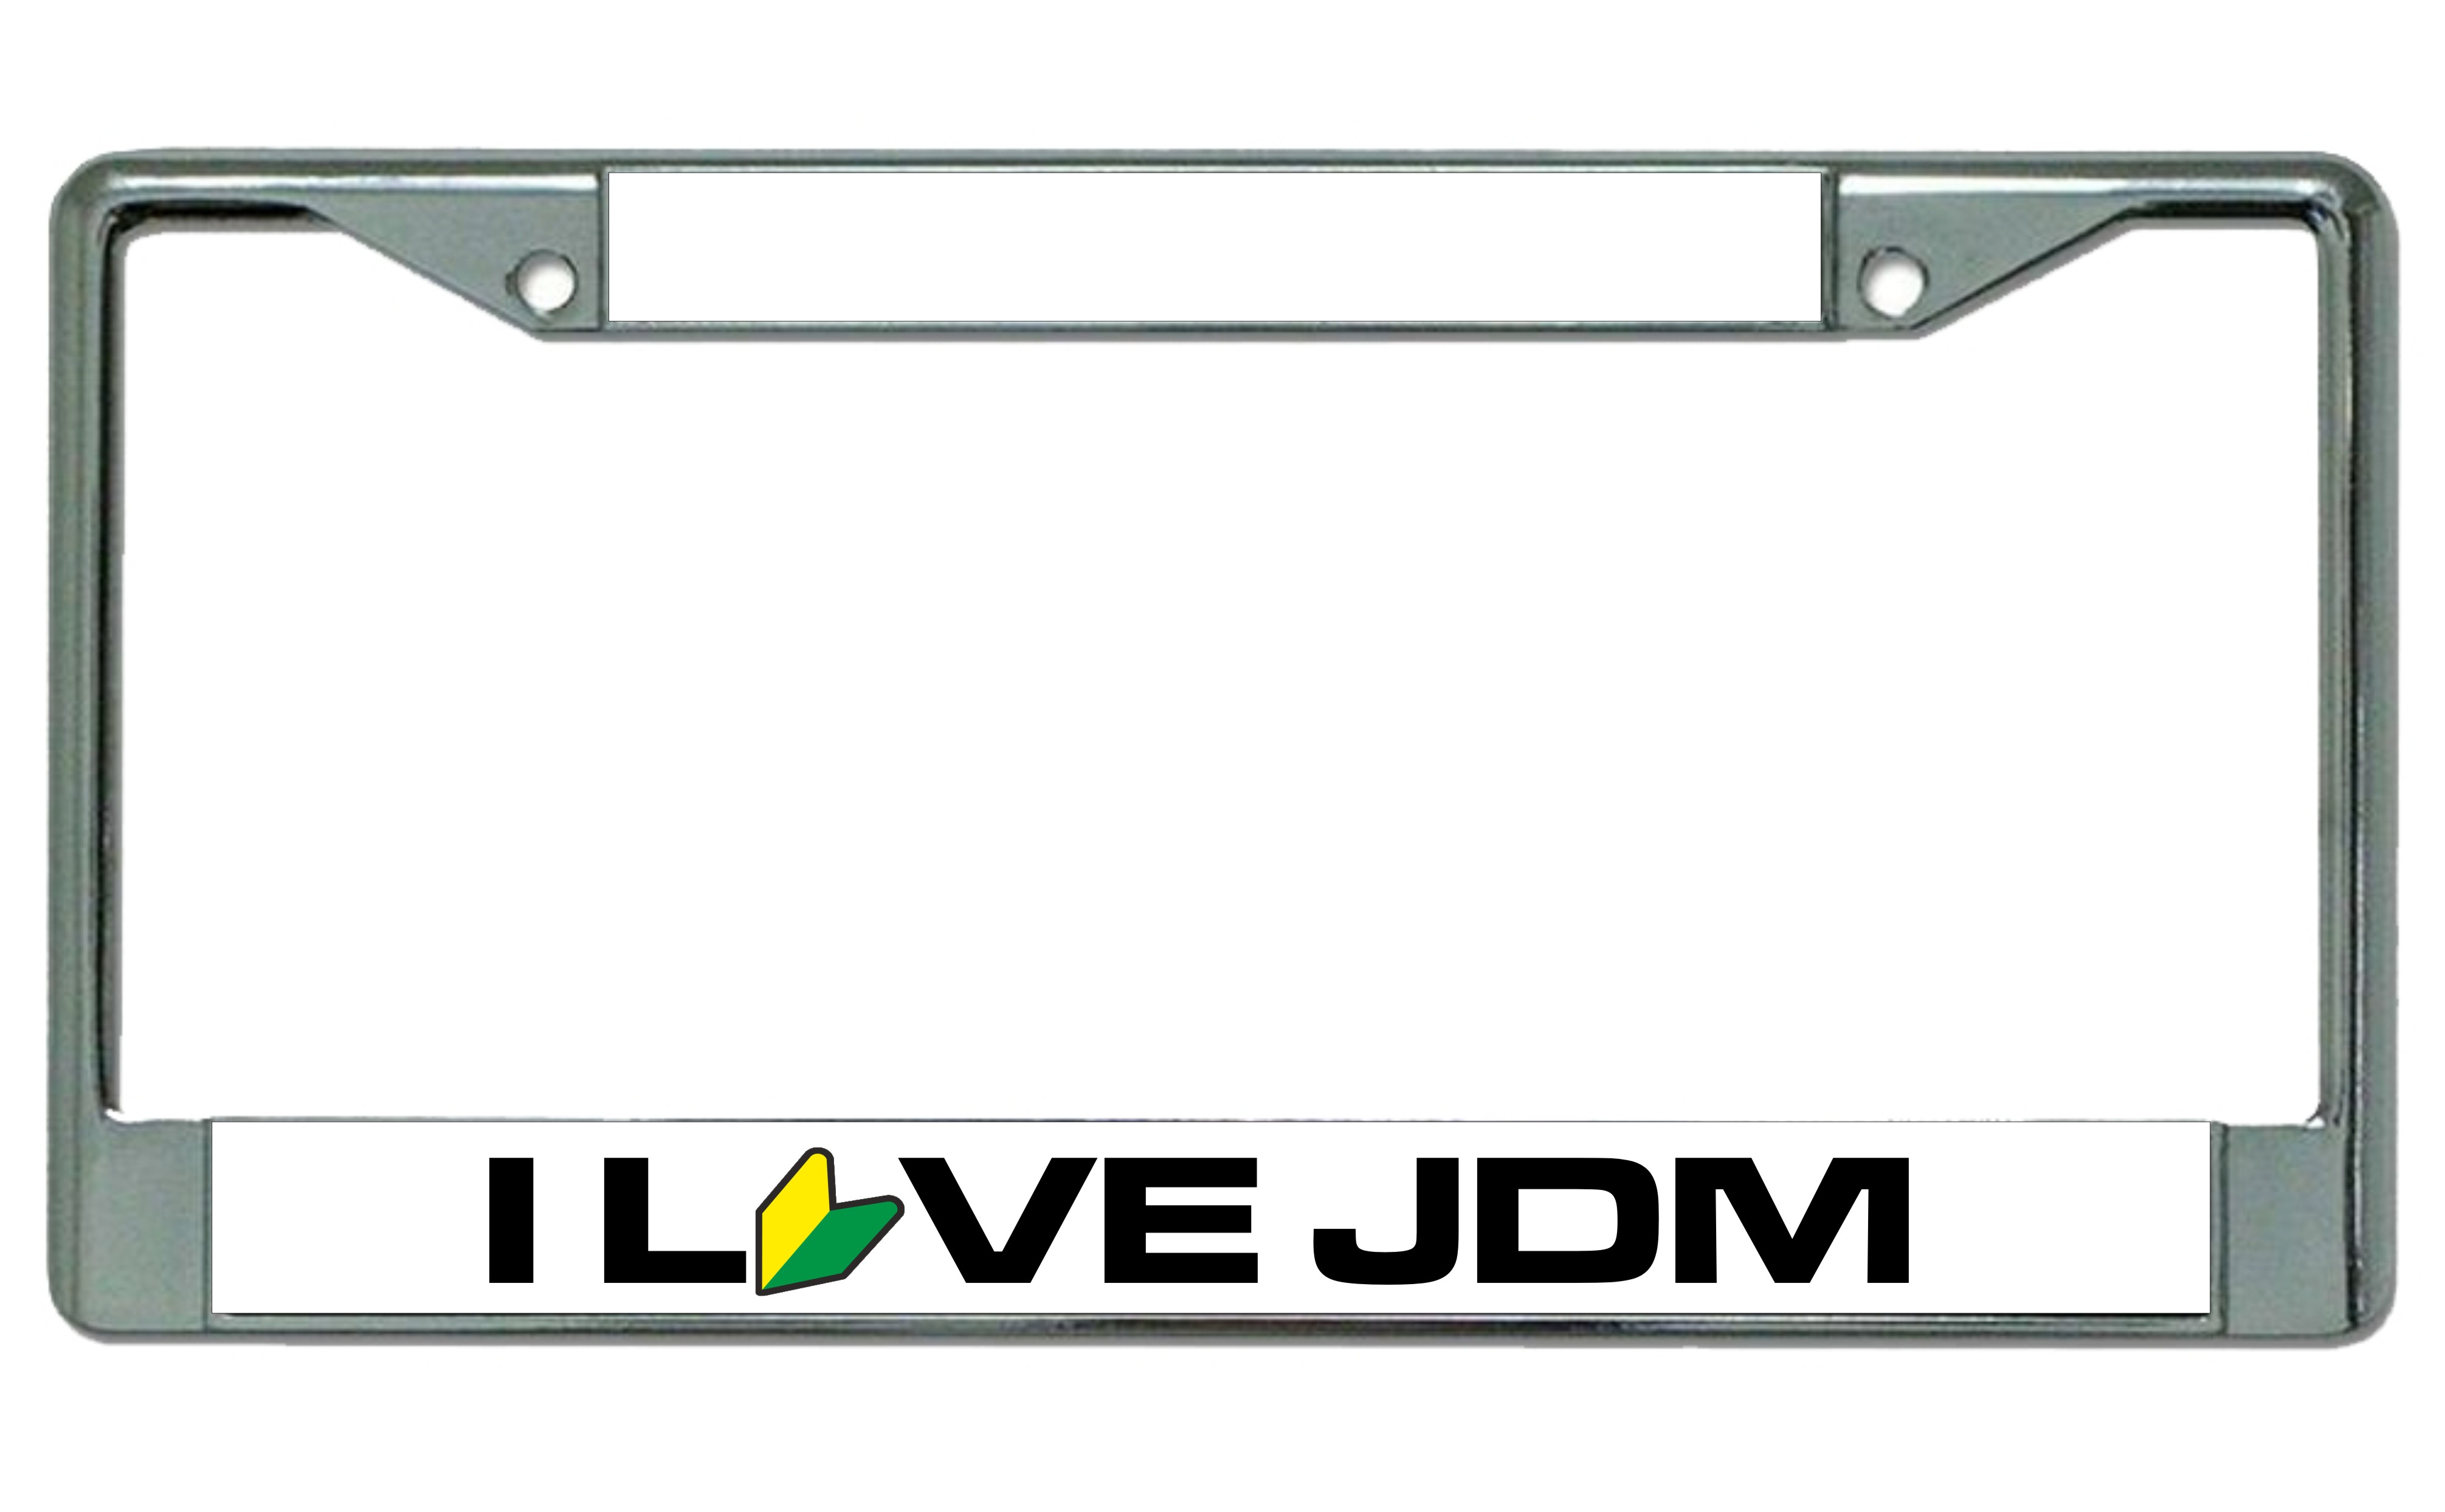 I Love JDM With Logo Photo License Plate Frame  Free SCREW Caps with this Frame